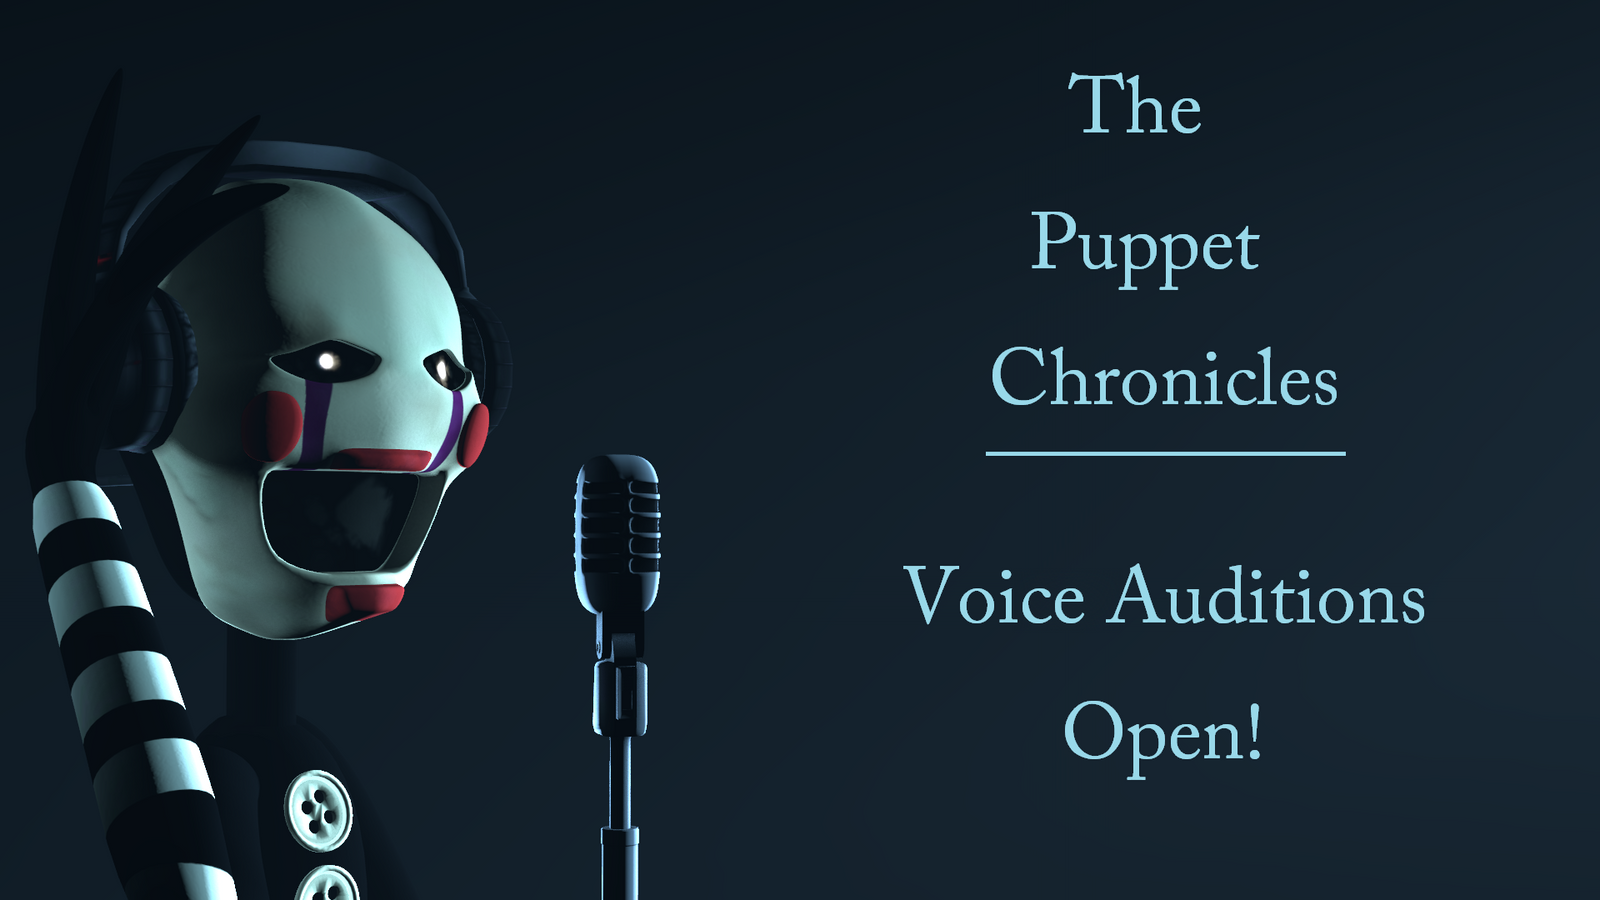 Scratchy Voice. Echo & the Bunnymen the Puppet. FNAF Voice lines animated перевод.